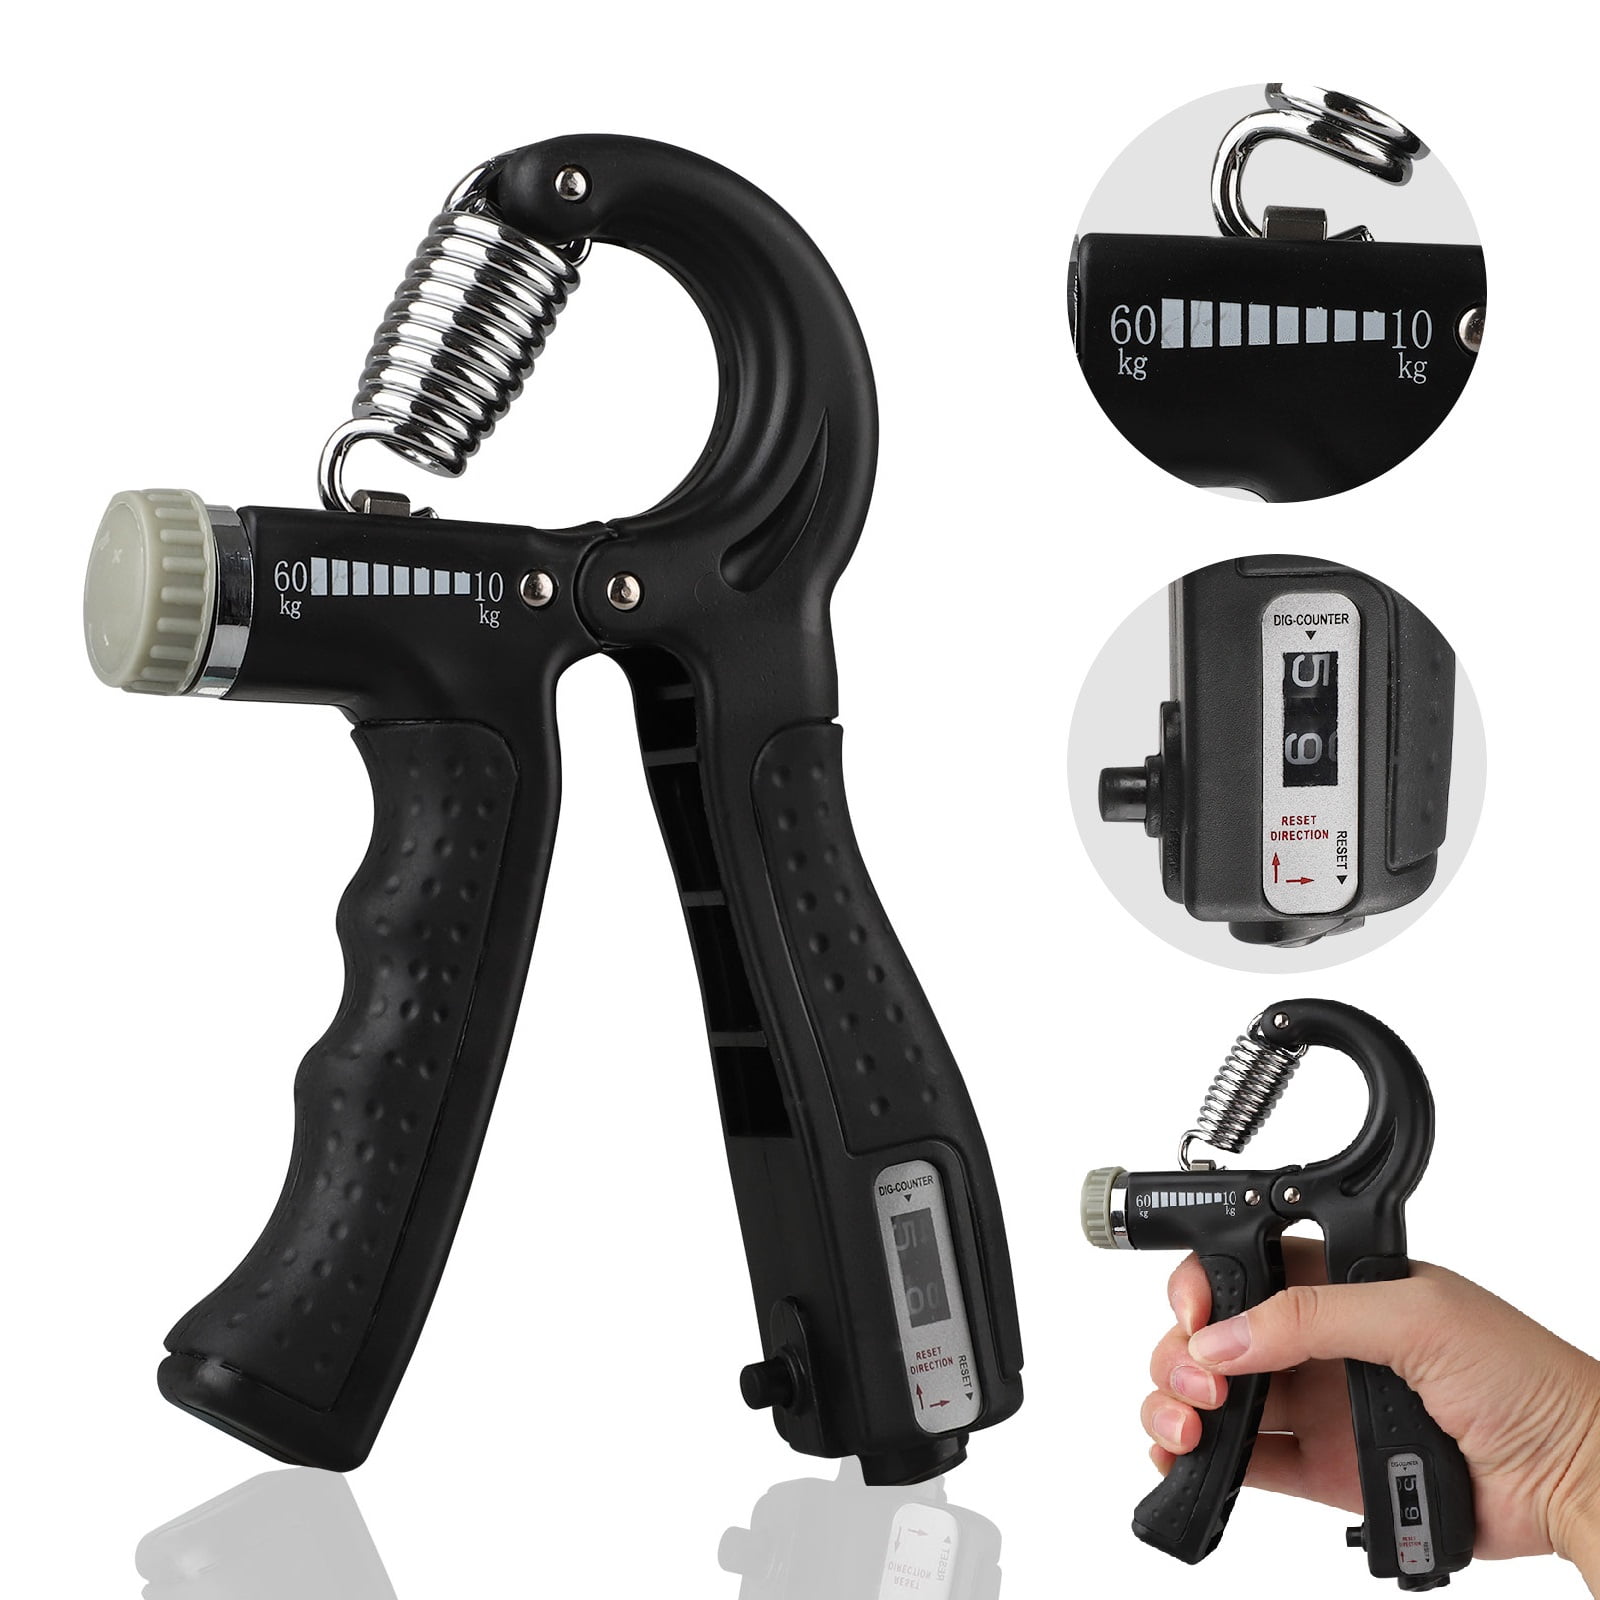 Details about   Adjustable Hand Grip Strengthener Wrist Therapy Forearm Trainer Gym Exerciser US 